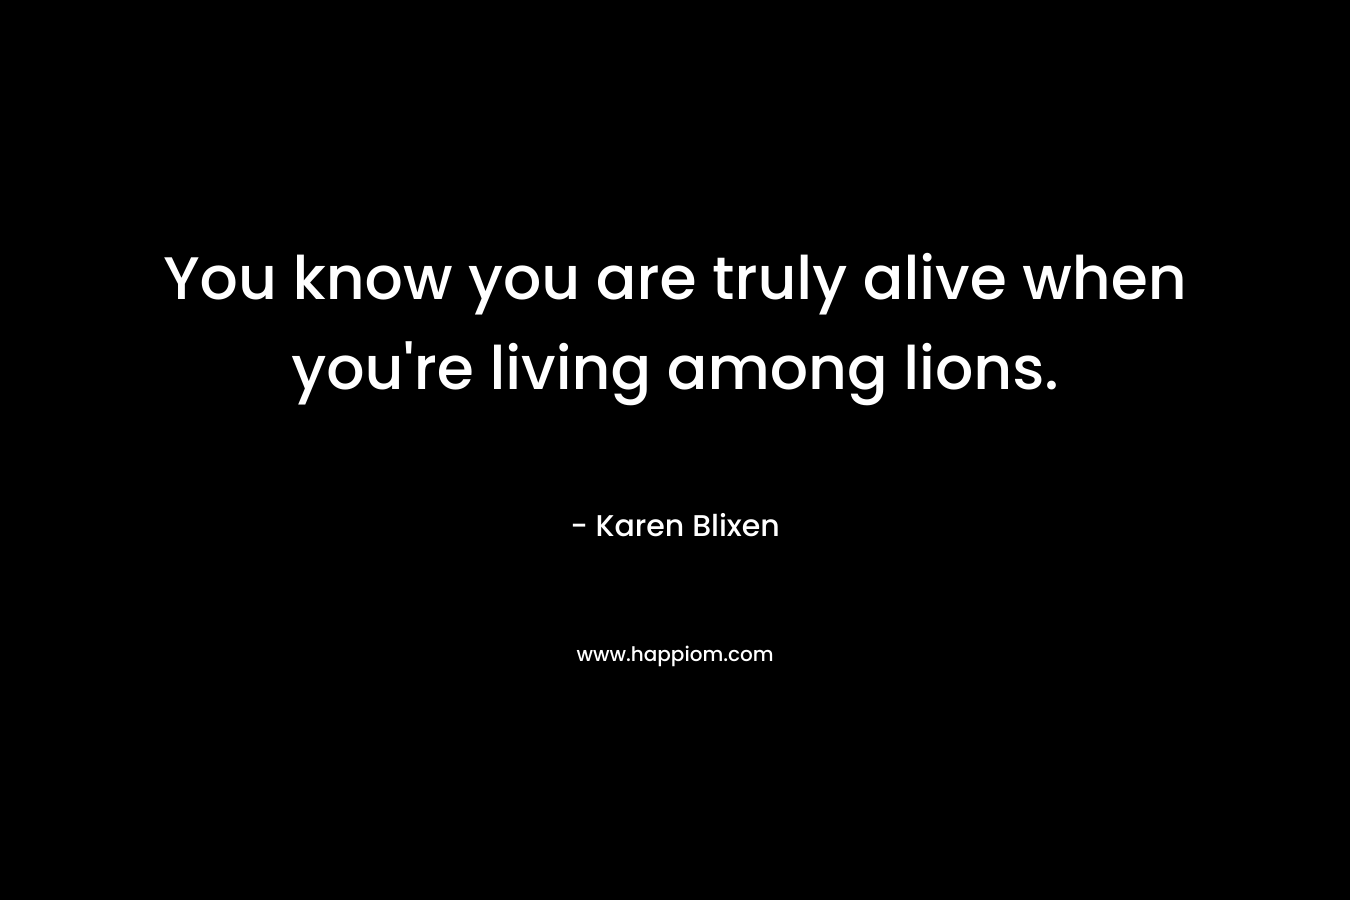 You know you are truly alive when you're living among lions.